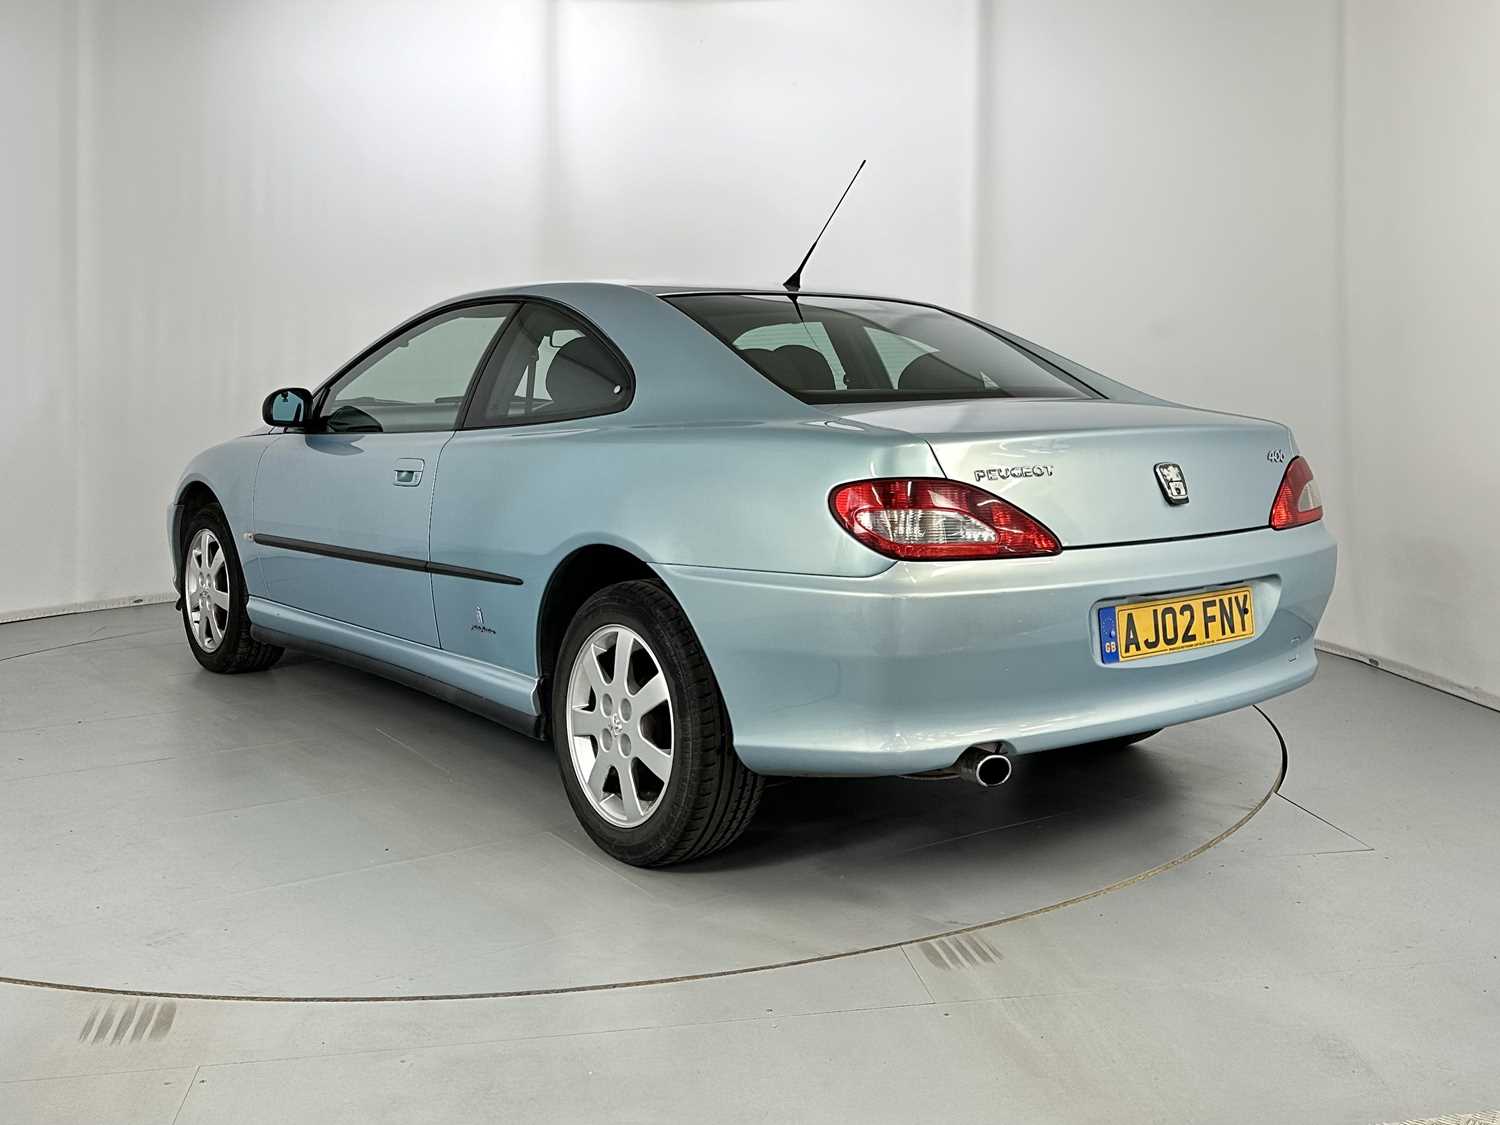 2002 Peugeot 406 Coupe - Image 7 of 28